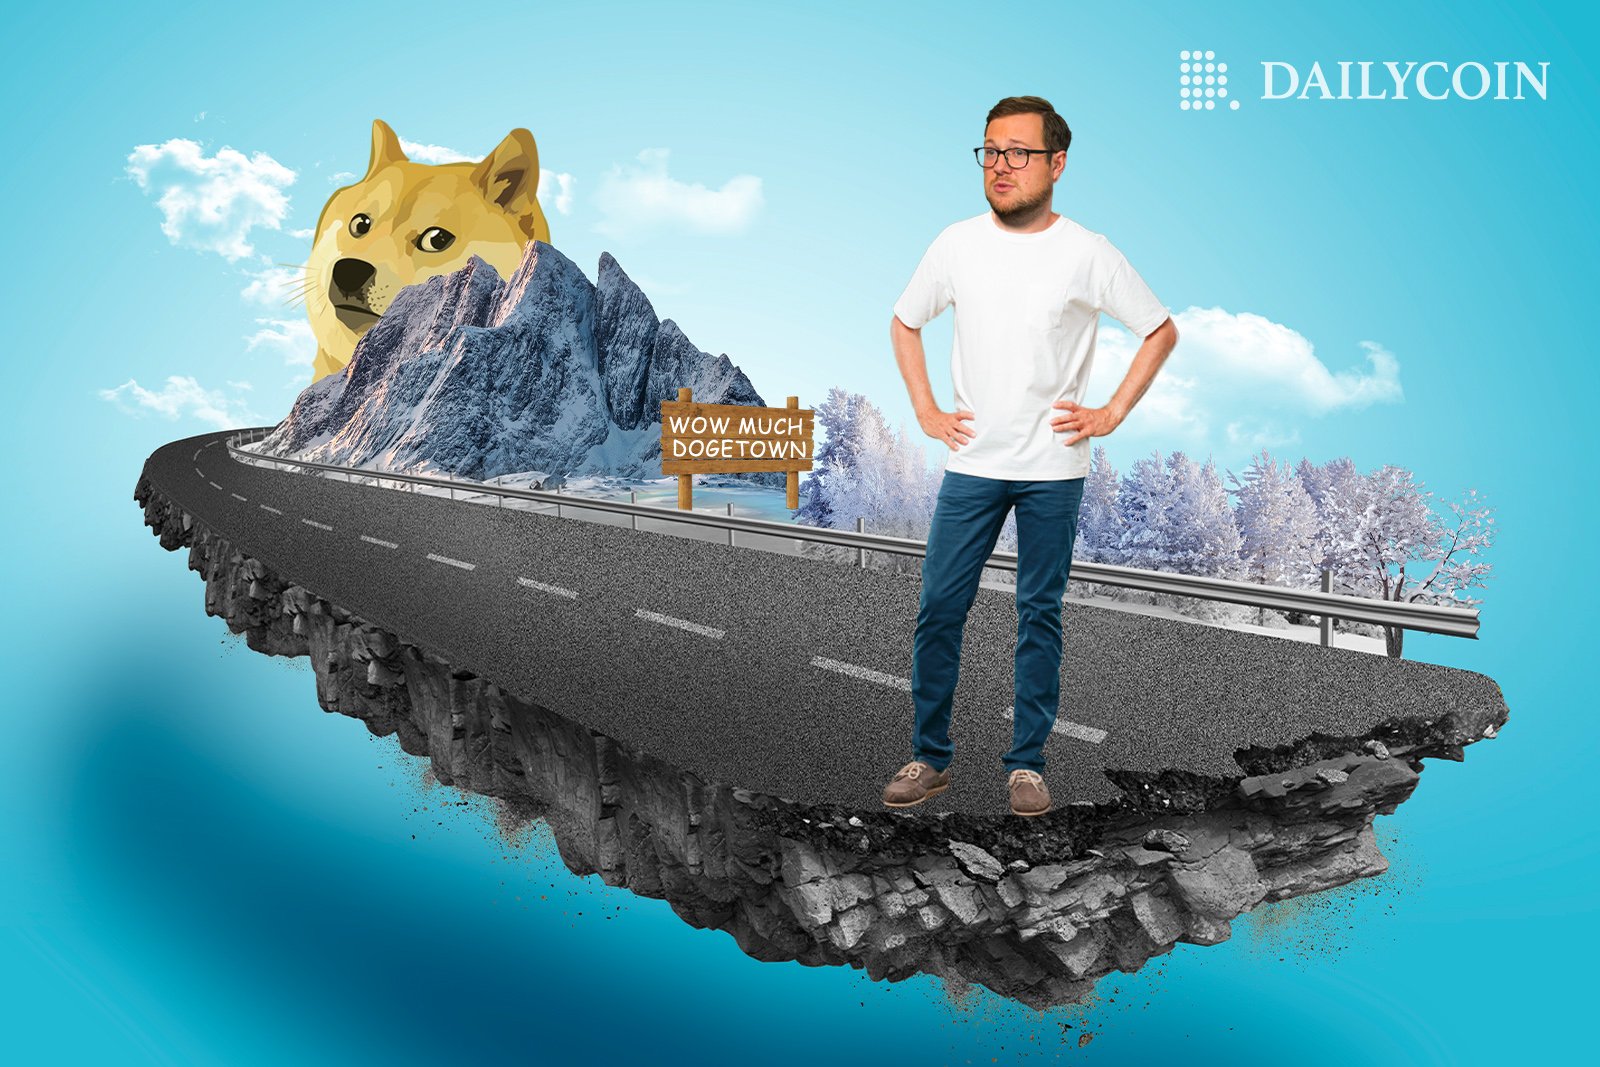 Billy Markus standing in the middle of the road on a floating island next to a doge hiding behind a mountain.